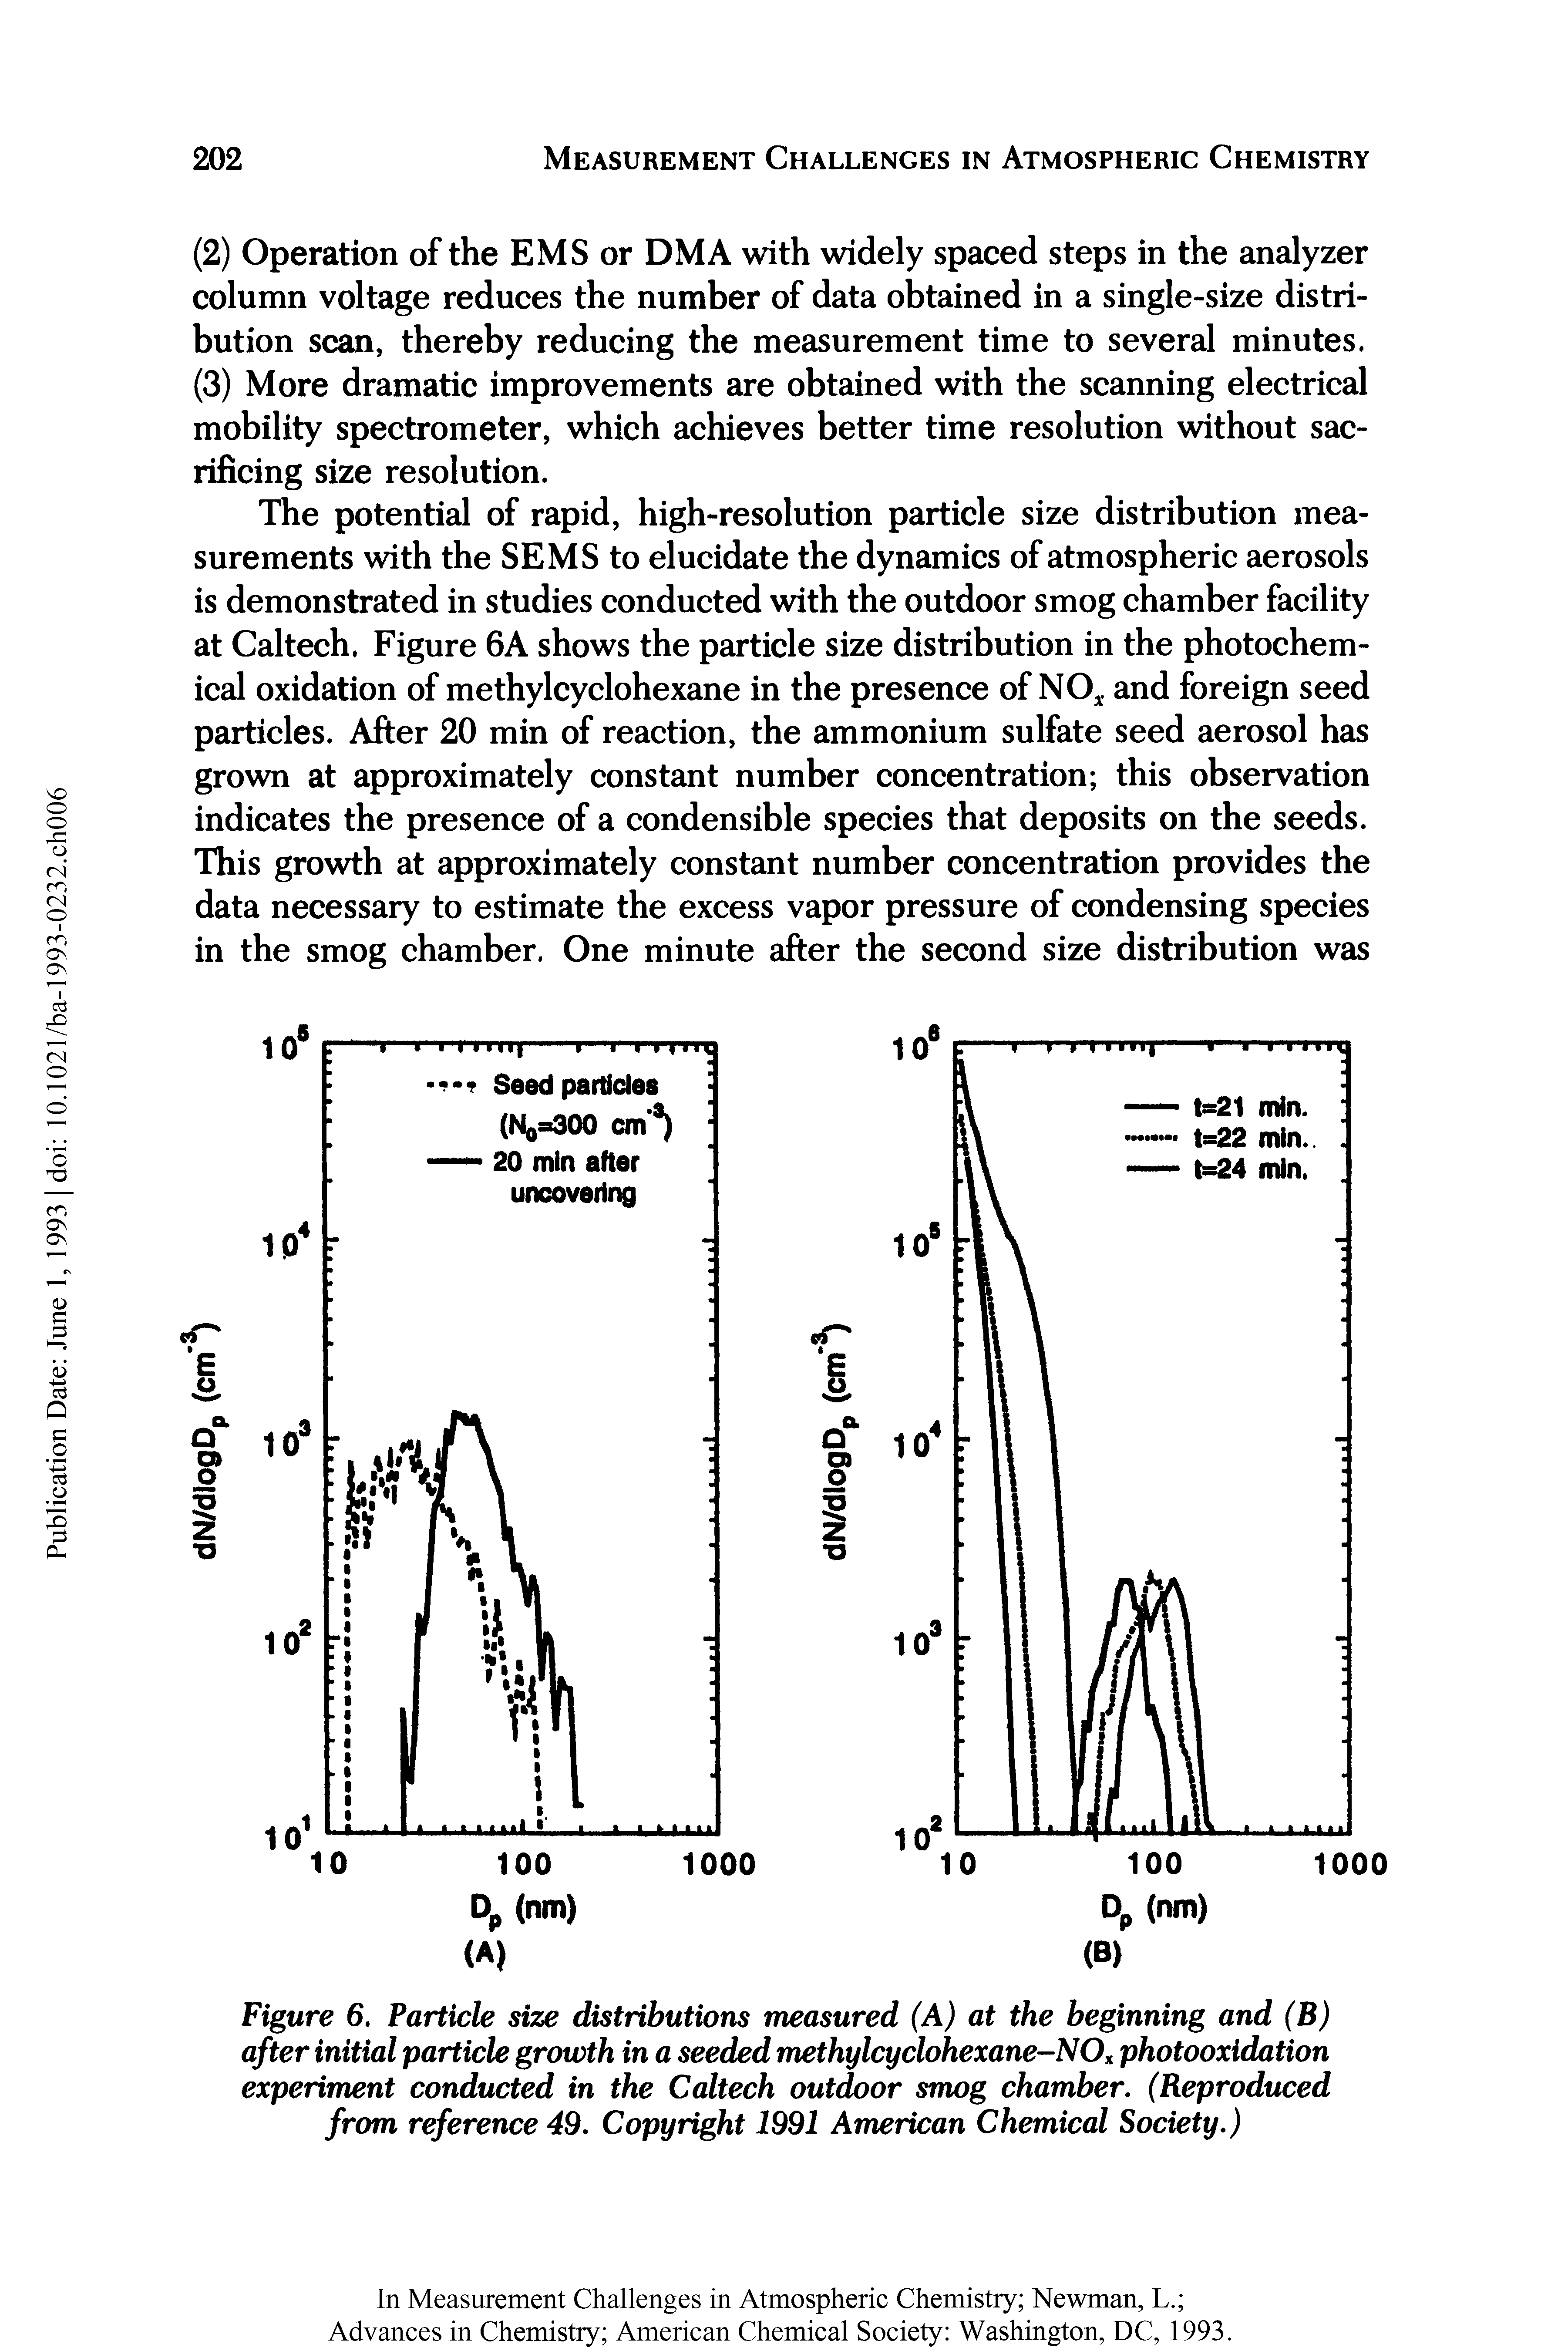 Figure 6. Particle size distributions measured (A) at the beginning and (B) after initial particle growth in a seeded methylcyclohexane-NOx photooxidation experiment conducted in the Caltech outdoor smog chamber. (Reproduced from reference 49. Copyright 1991 American Chemical Society.)...